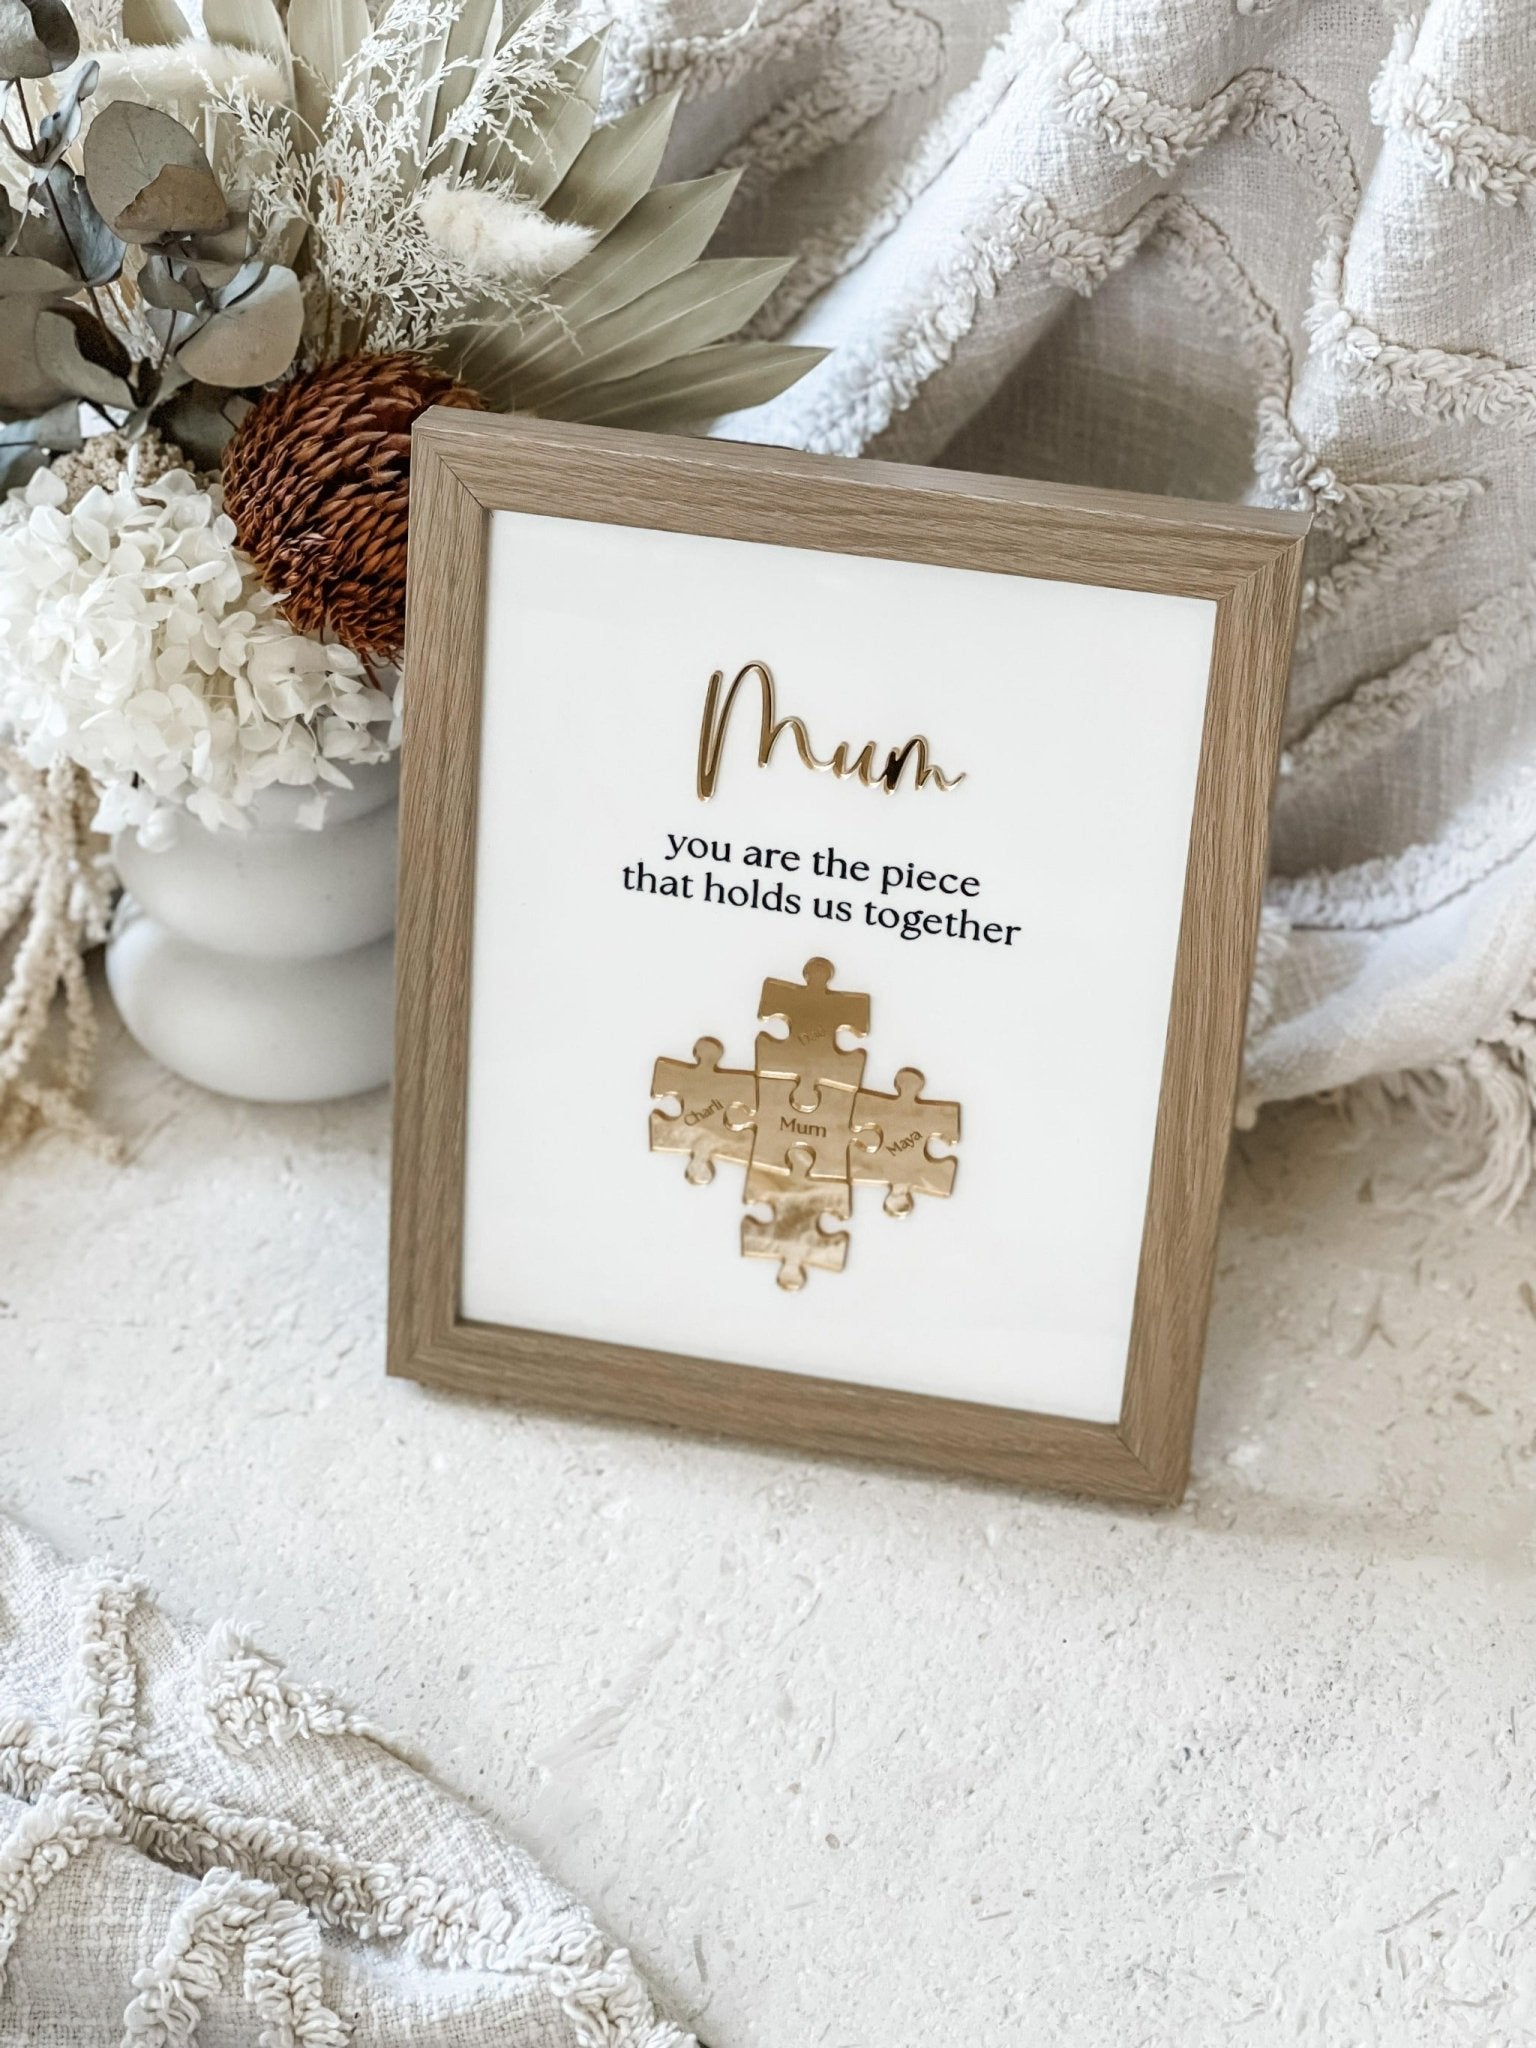 "Mum, you are the piece that holds us together" Puzzle Frame - The Humble Gift Co.